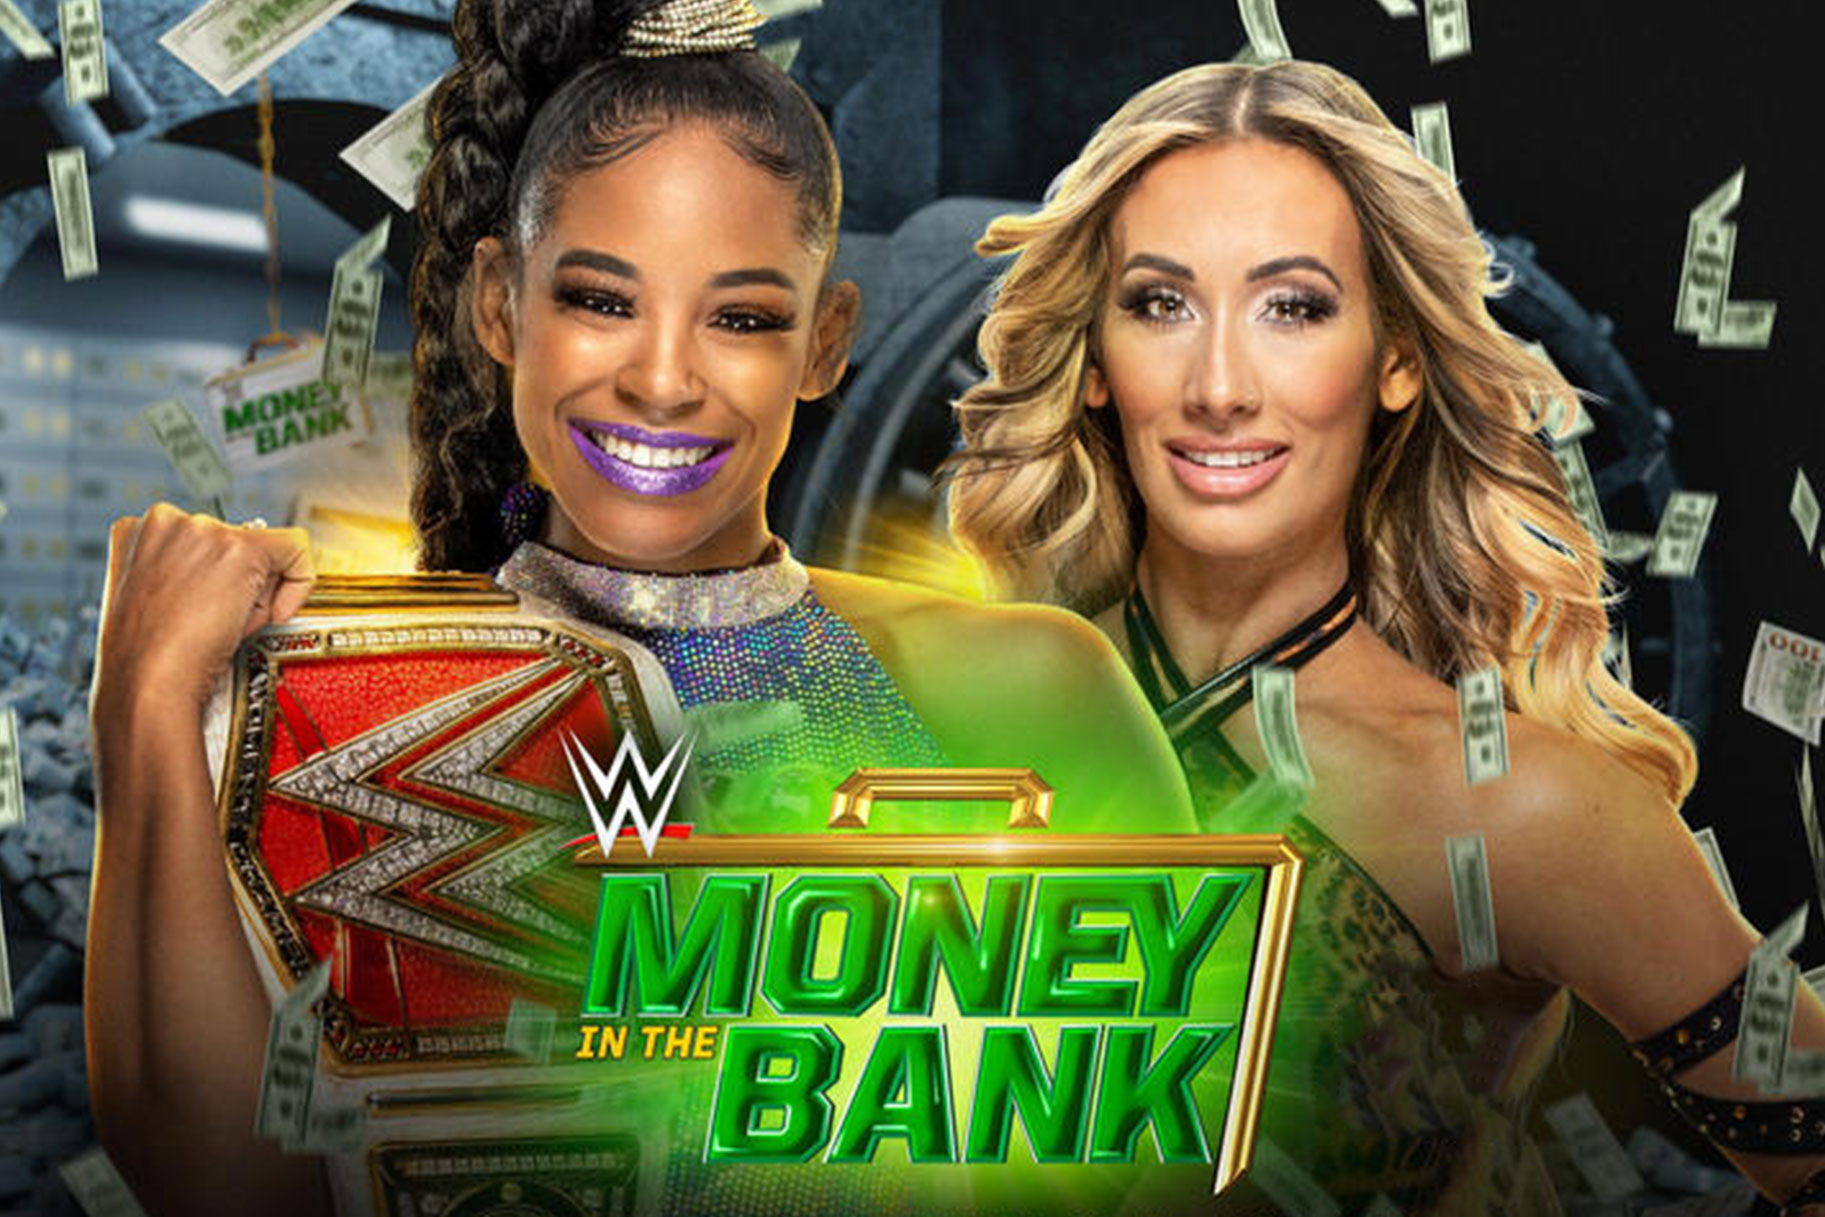 promo image for money in the Bank that features Bianca Belair and Carmella